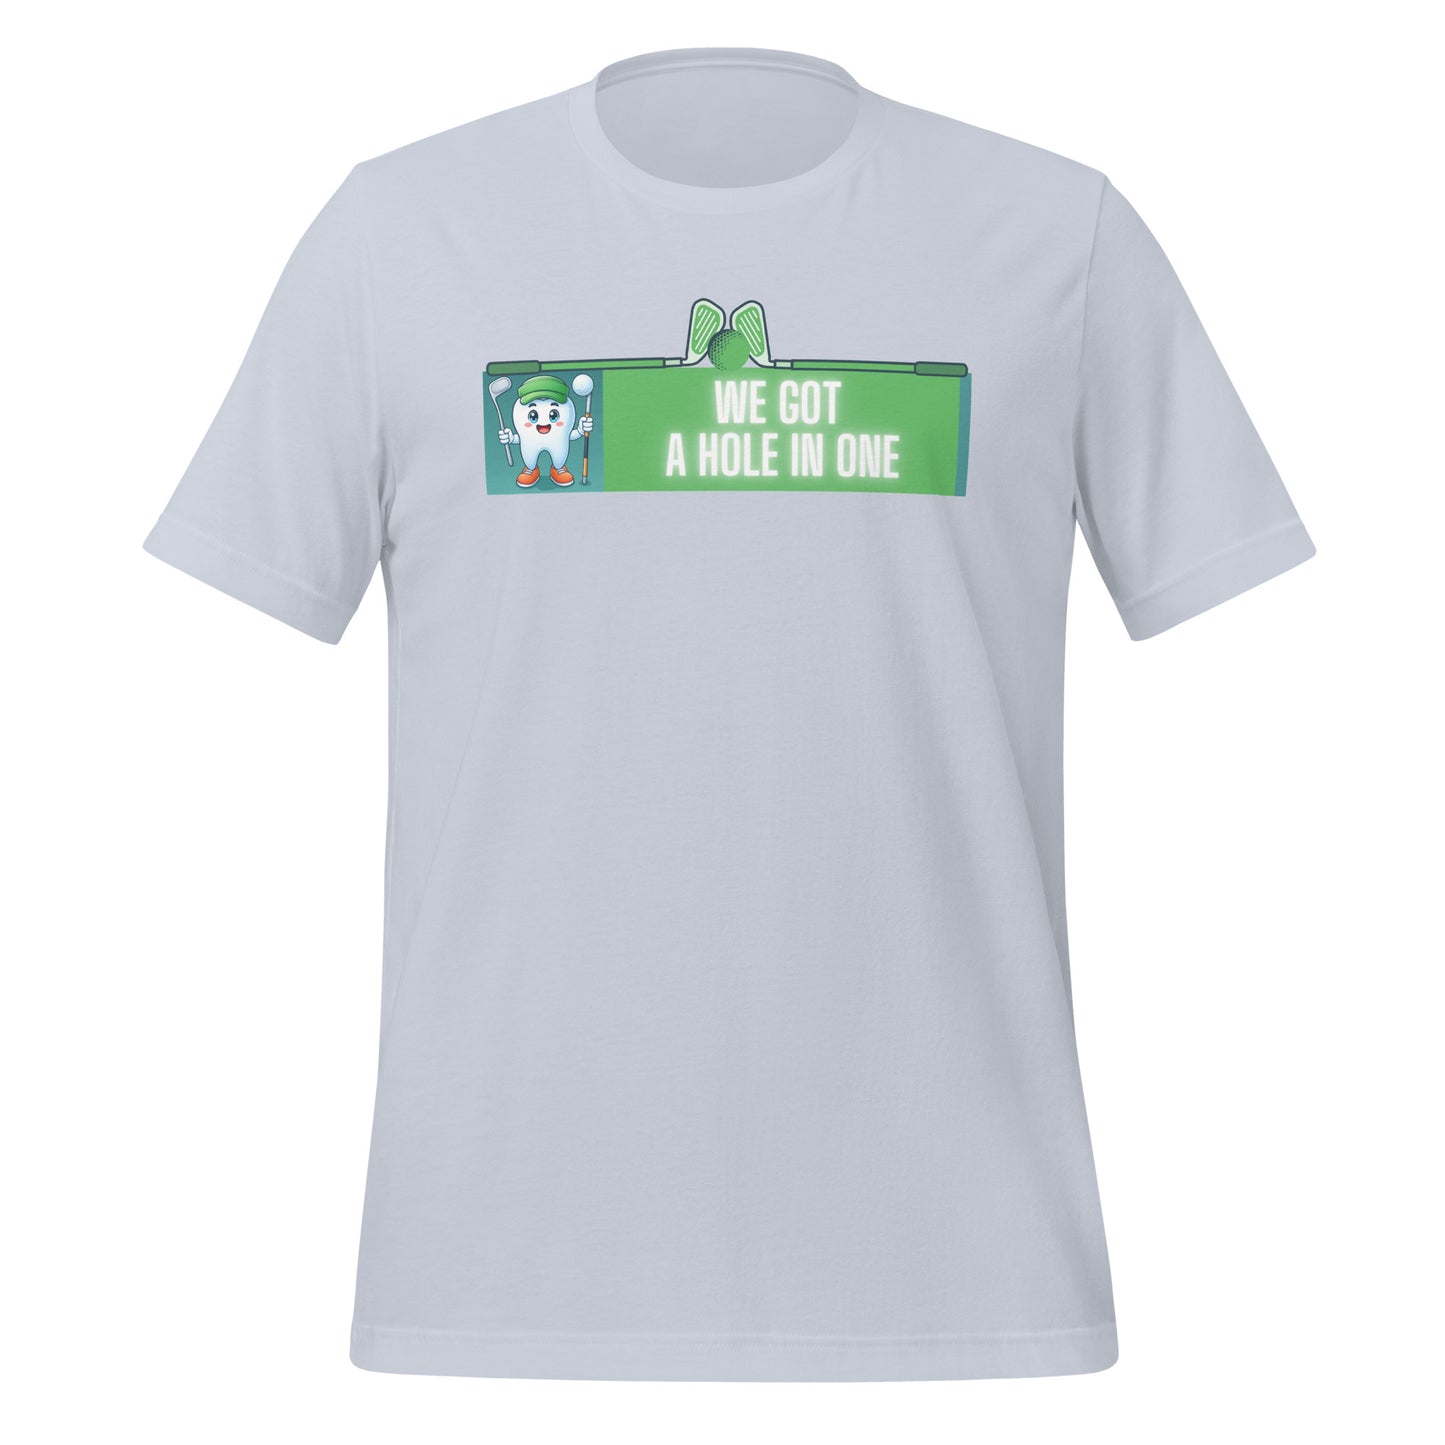 Cute dentist t-shirt showcasing an adorable tooth character in golf attire, joyfully celebrating a ‘hole in one’ achievement, perfect for dentist and dental professionals seeking unique and thematic dental apparel. Light blue color, front view.